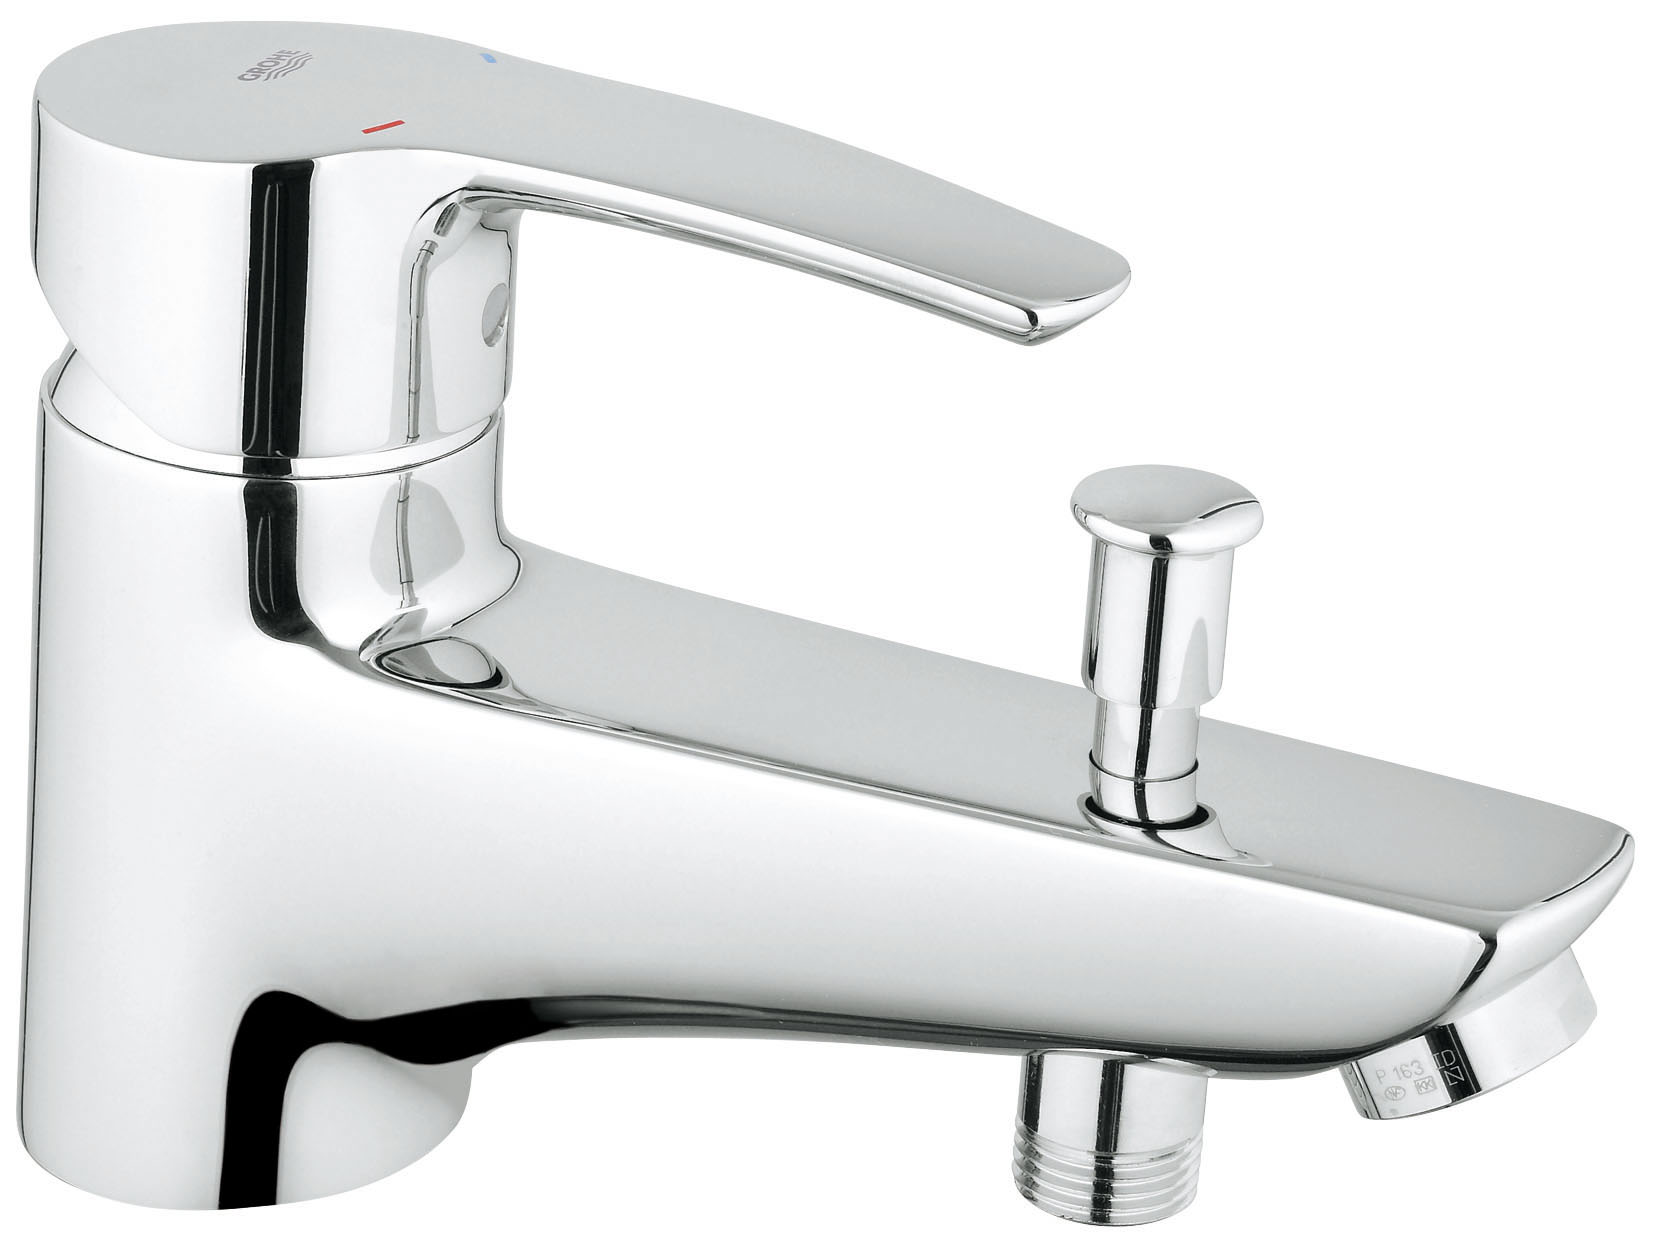    GROHE Eurostyle c    (33614001) - Grohe33614001      46     Eco-Override-Stop      .  2,5 /.  : /       1/2?            GROHE StarLight  